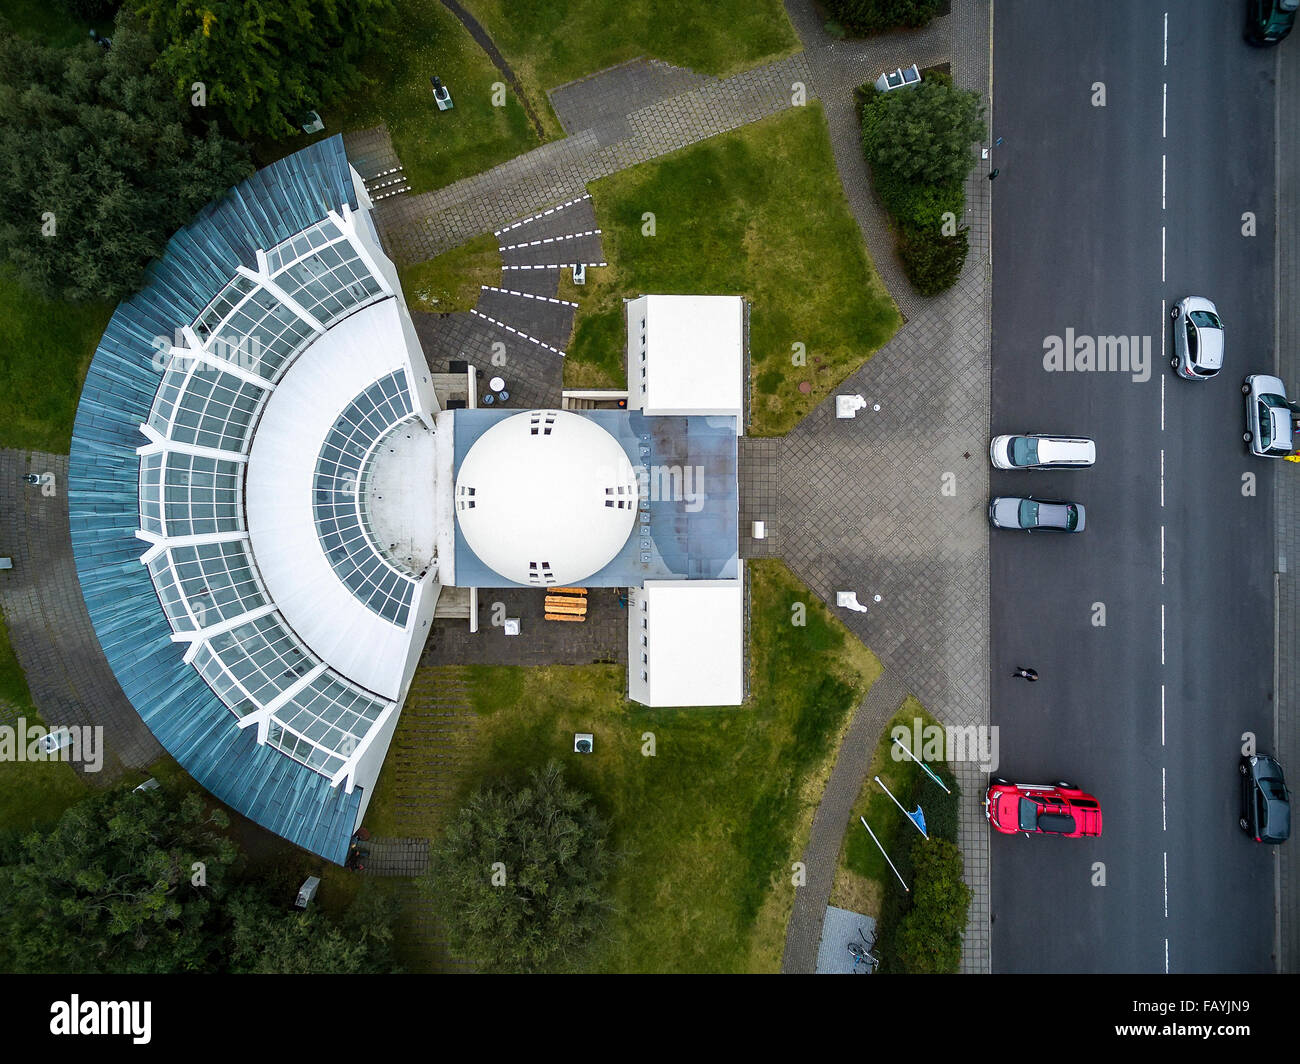 Top view of the Sculptor Asmundur Sveinsson art gallery, image shot with a drone, Reykjavik, Iceland Stock Photo